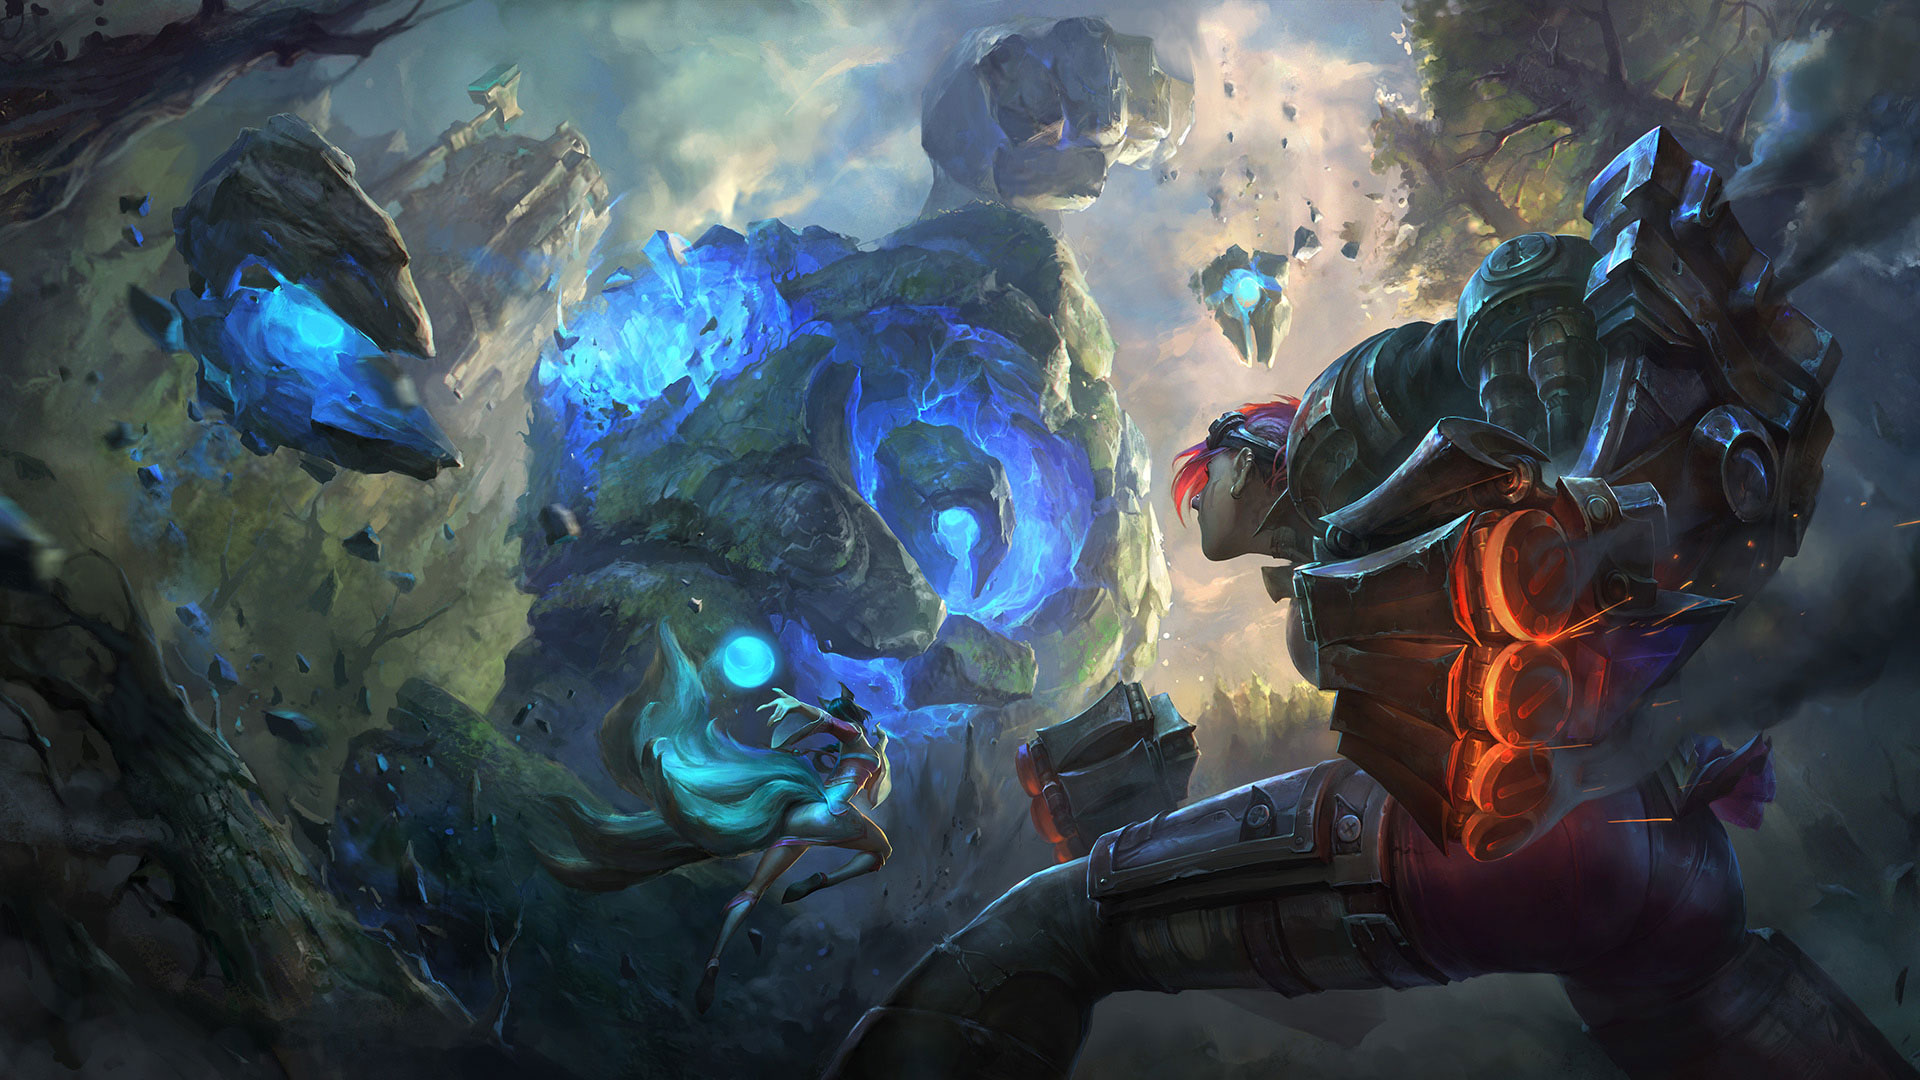 True Damage is this year's League of Legends musical group - The Rift Herald